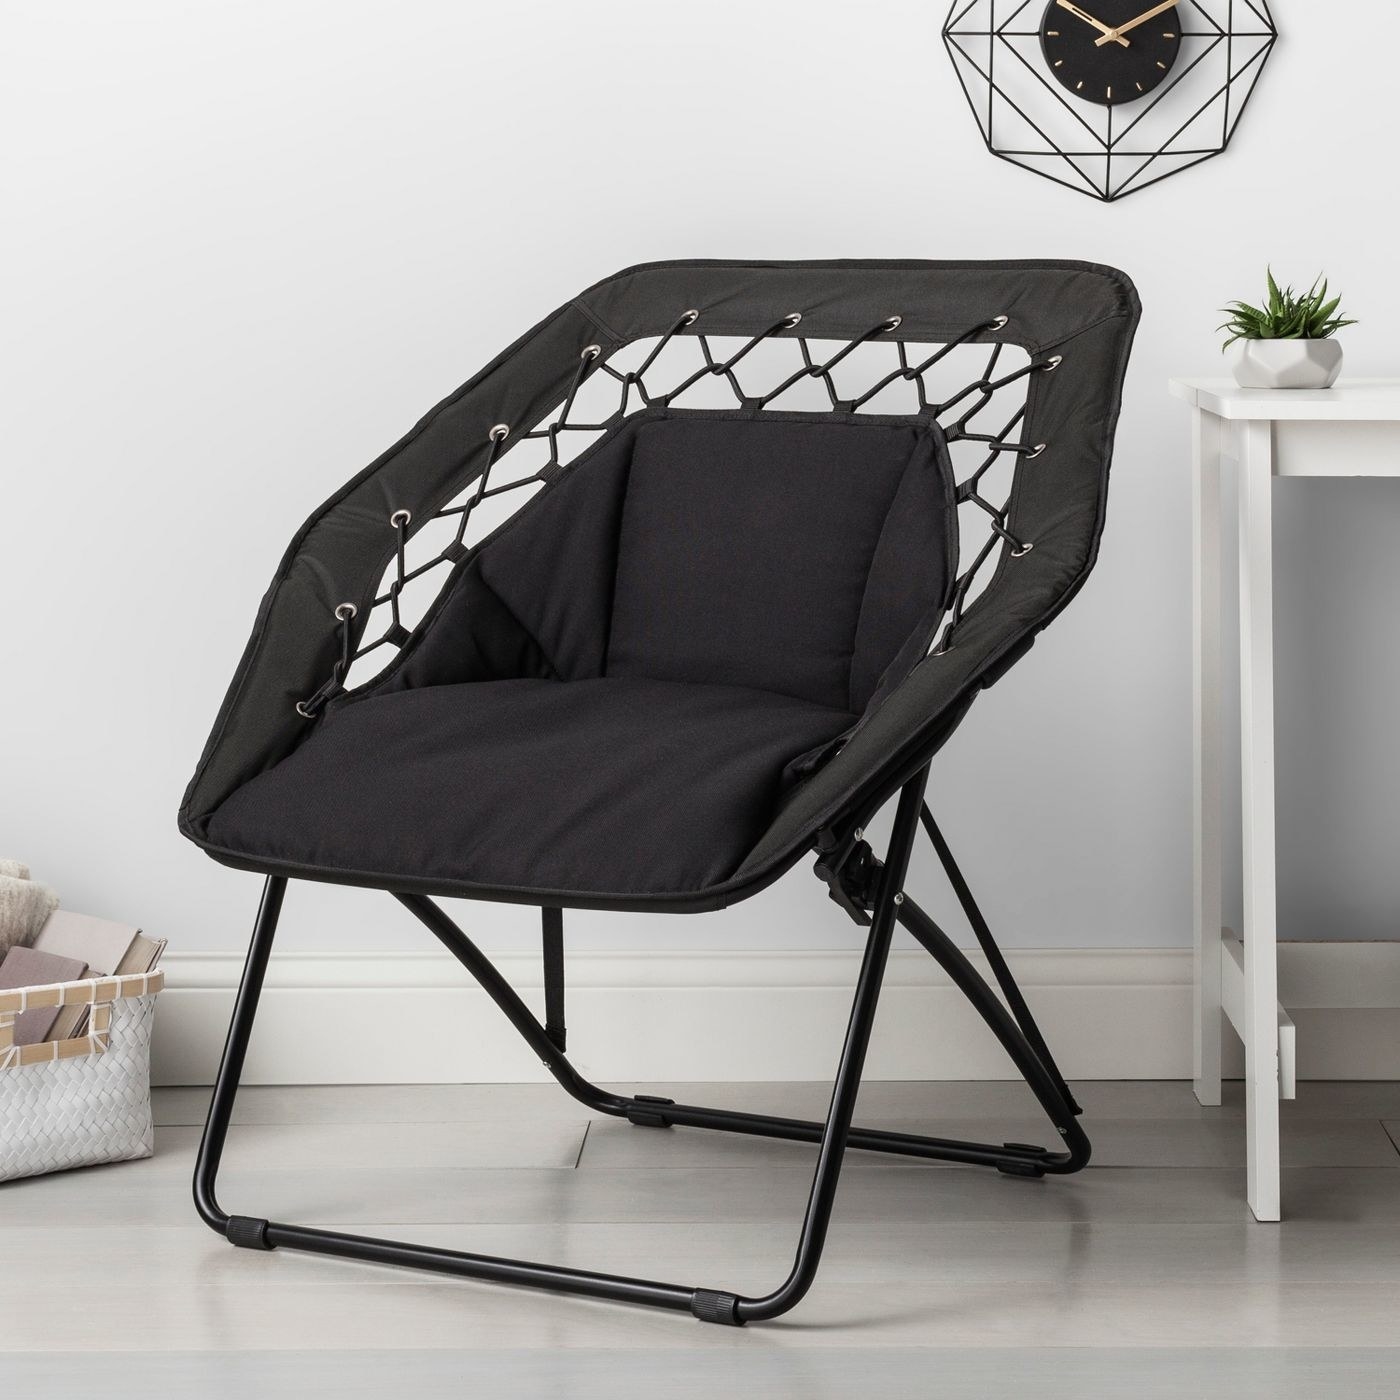 The black hex bungee chair